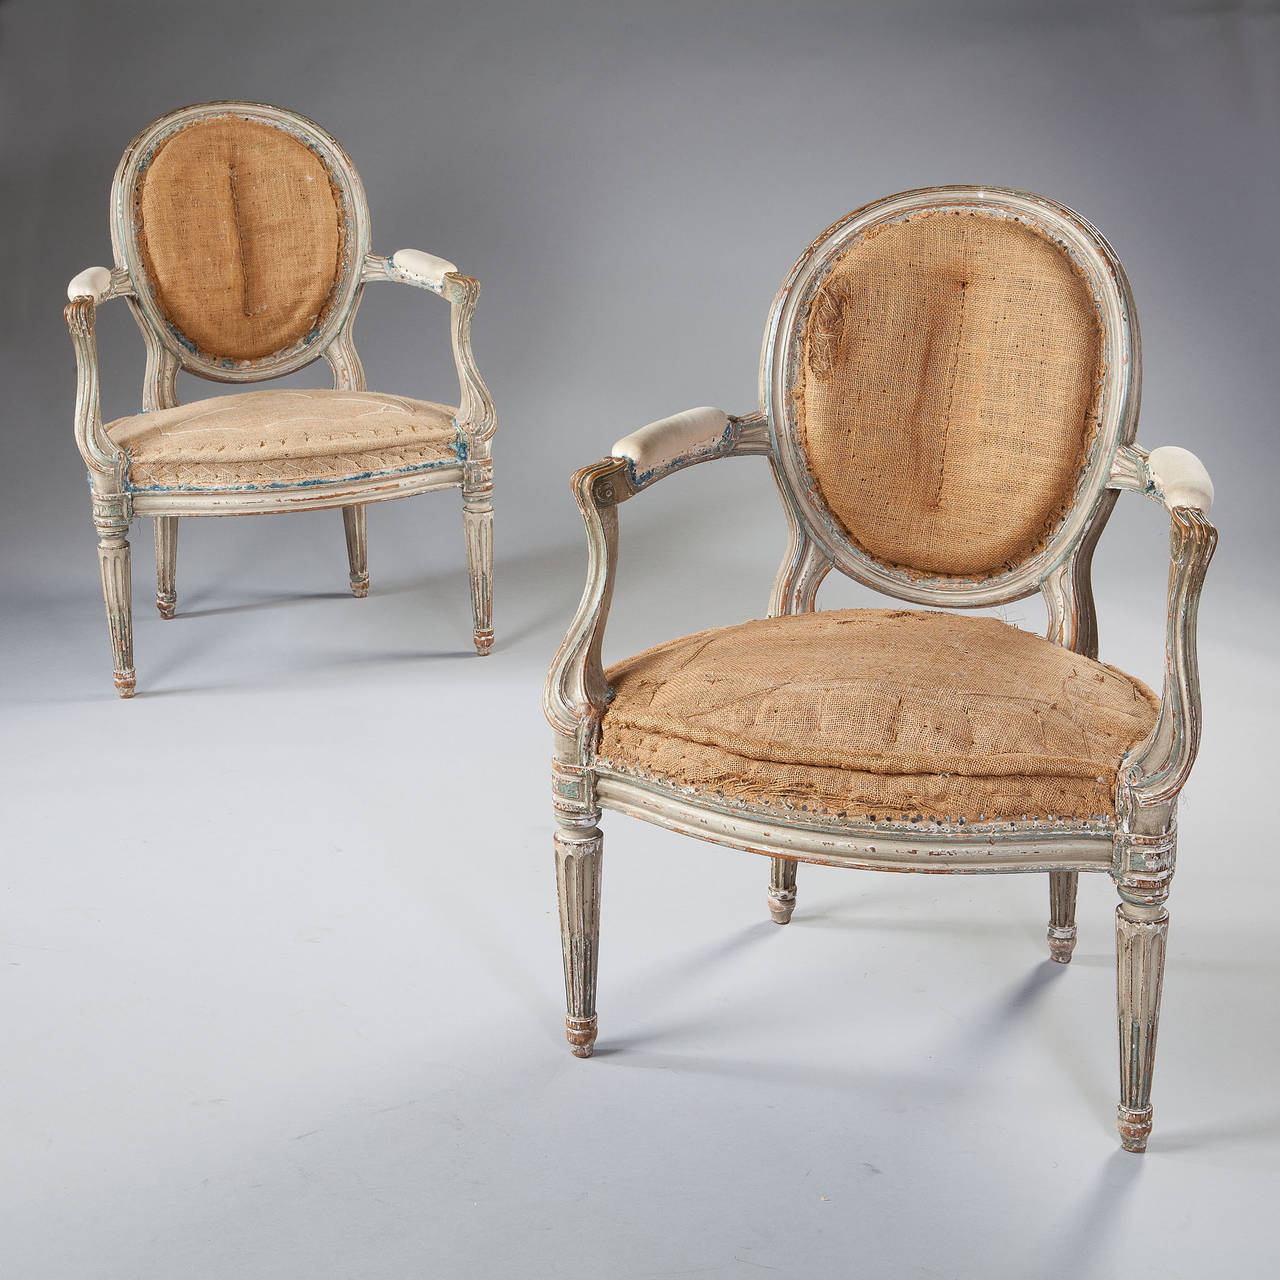 A fine pair of painted neo classical fauteuil armchairs, each with oval backs raised on elongated supports, the outswept arms curving tho the knee and raised on fluted legs with stop fluting and terminating in topie feet.